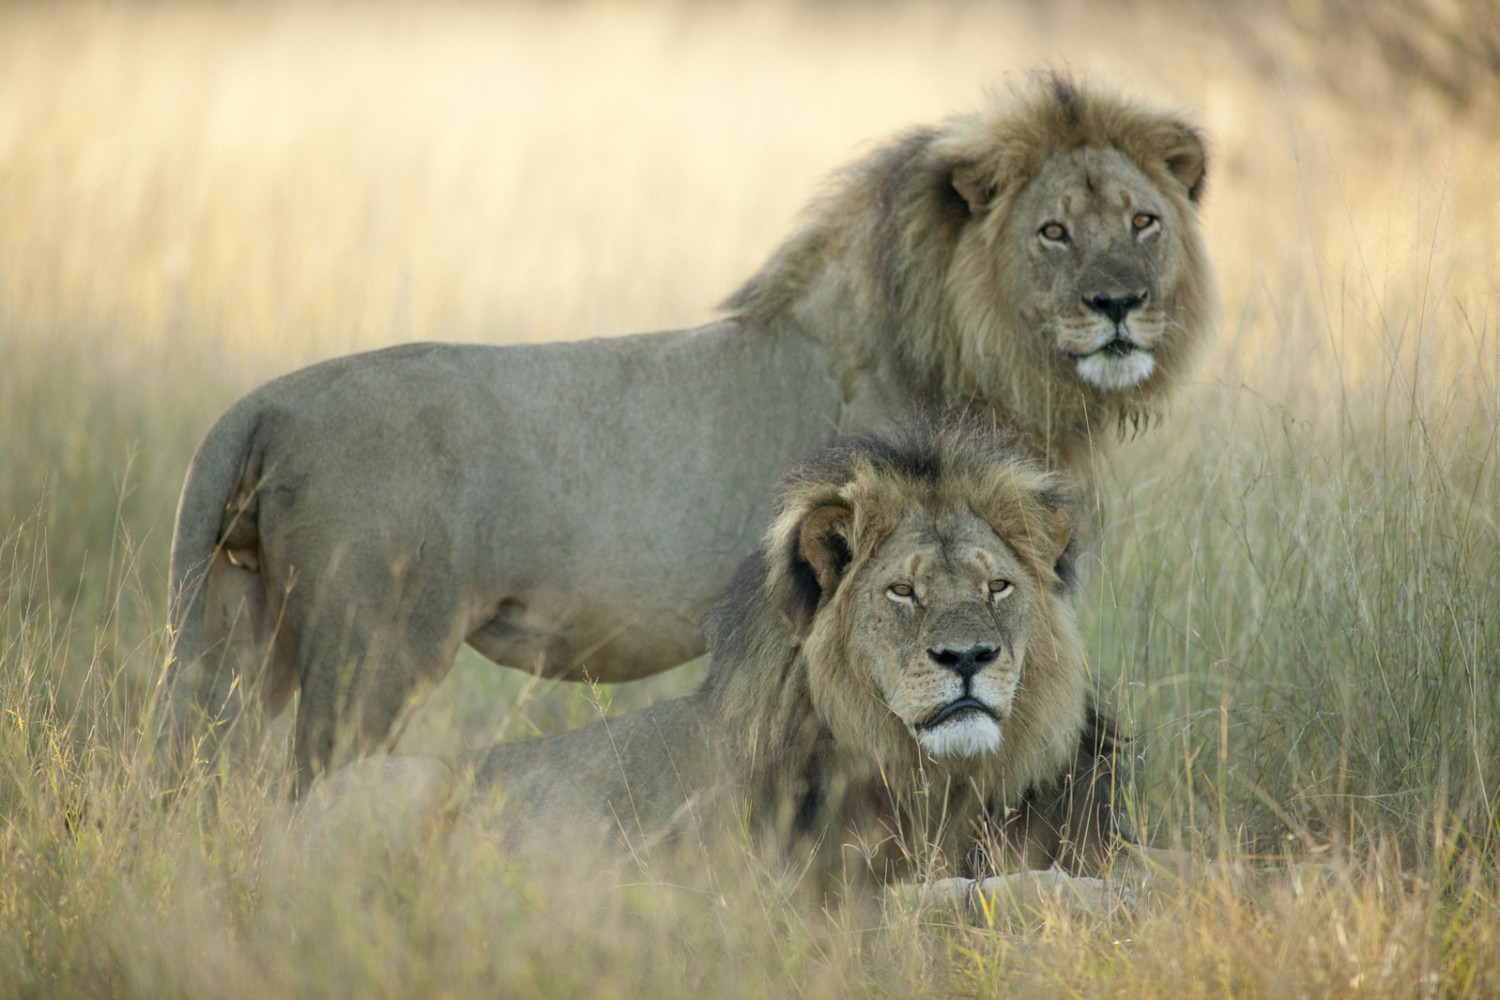 The Last Known Photo of Cecil the Lion, and the Story Behind It